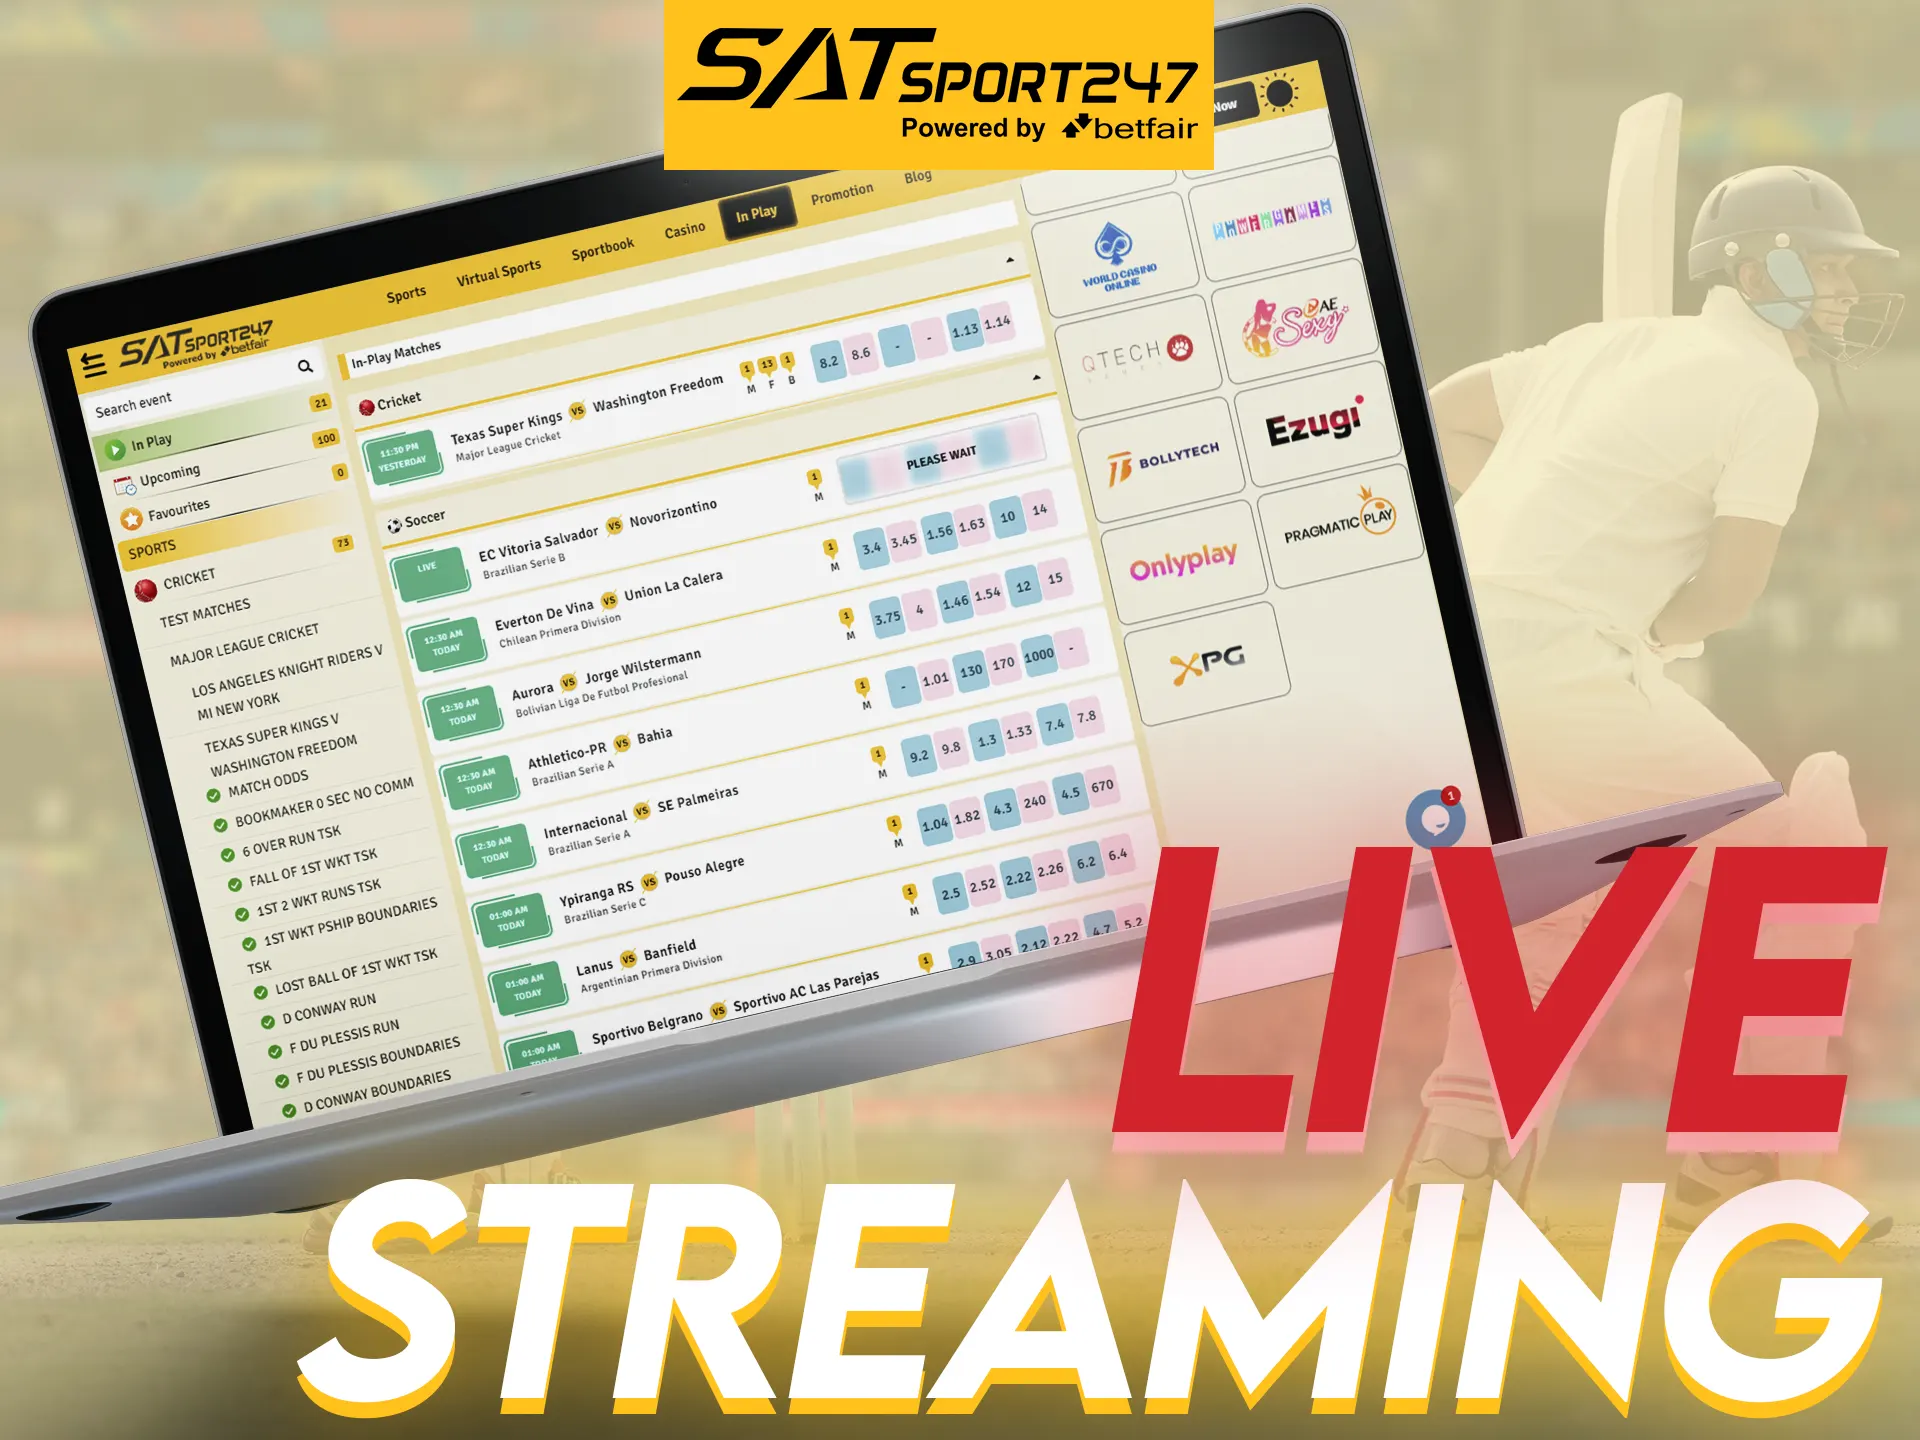 Watch match streaming with Satsport247.